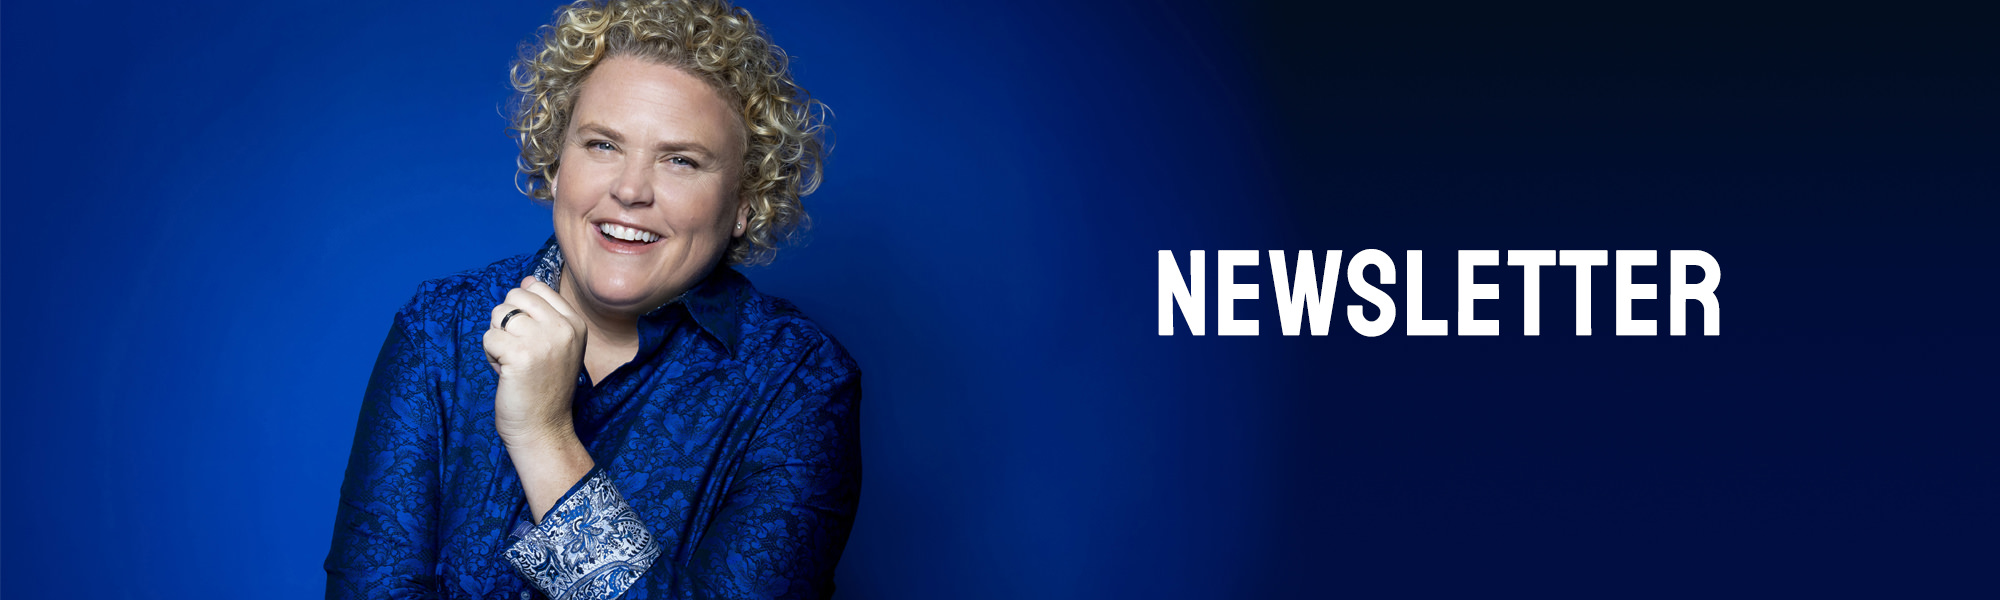 Comedian Fortune Feimster in front of a vivid blue background wearing a blue paisley shirt.